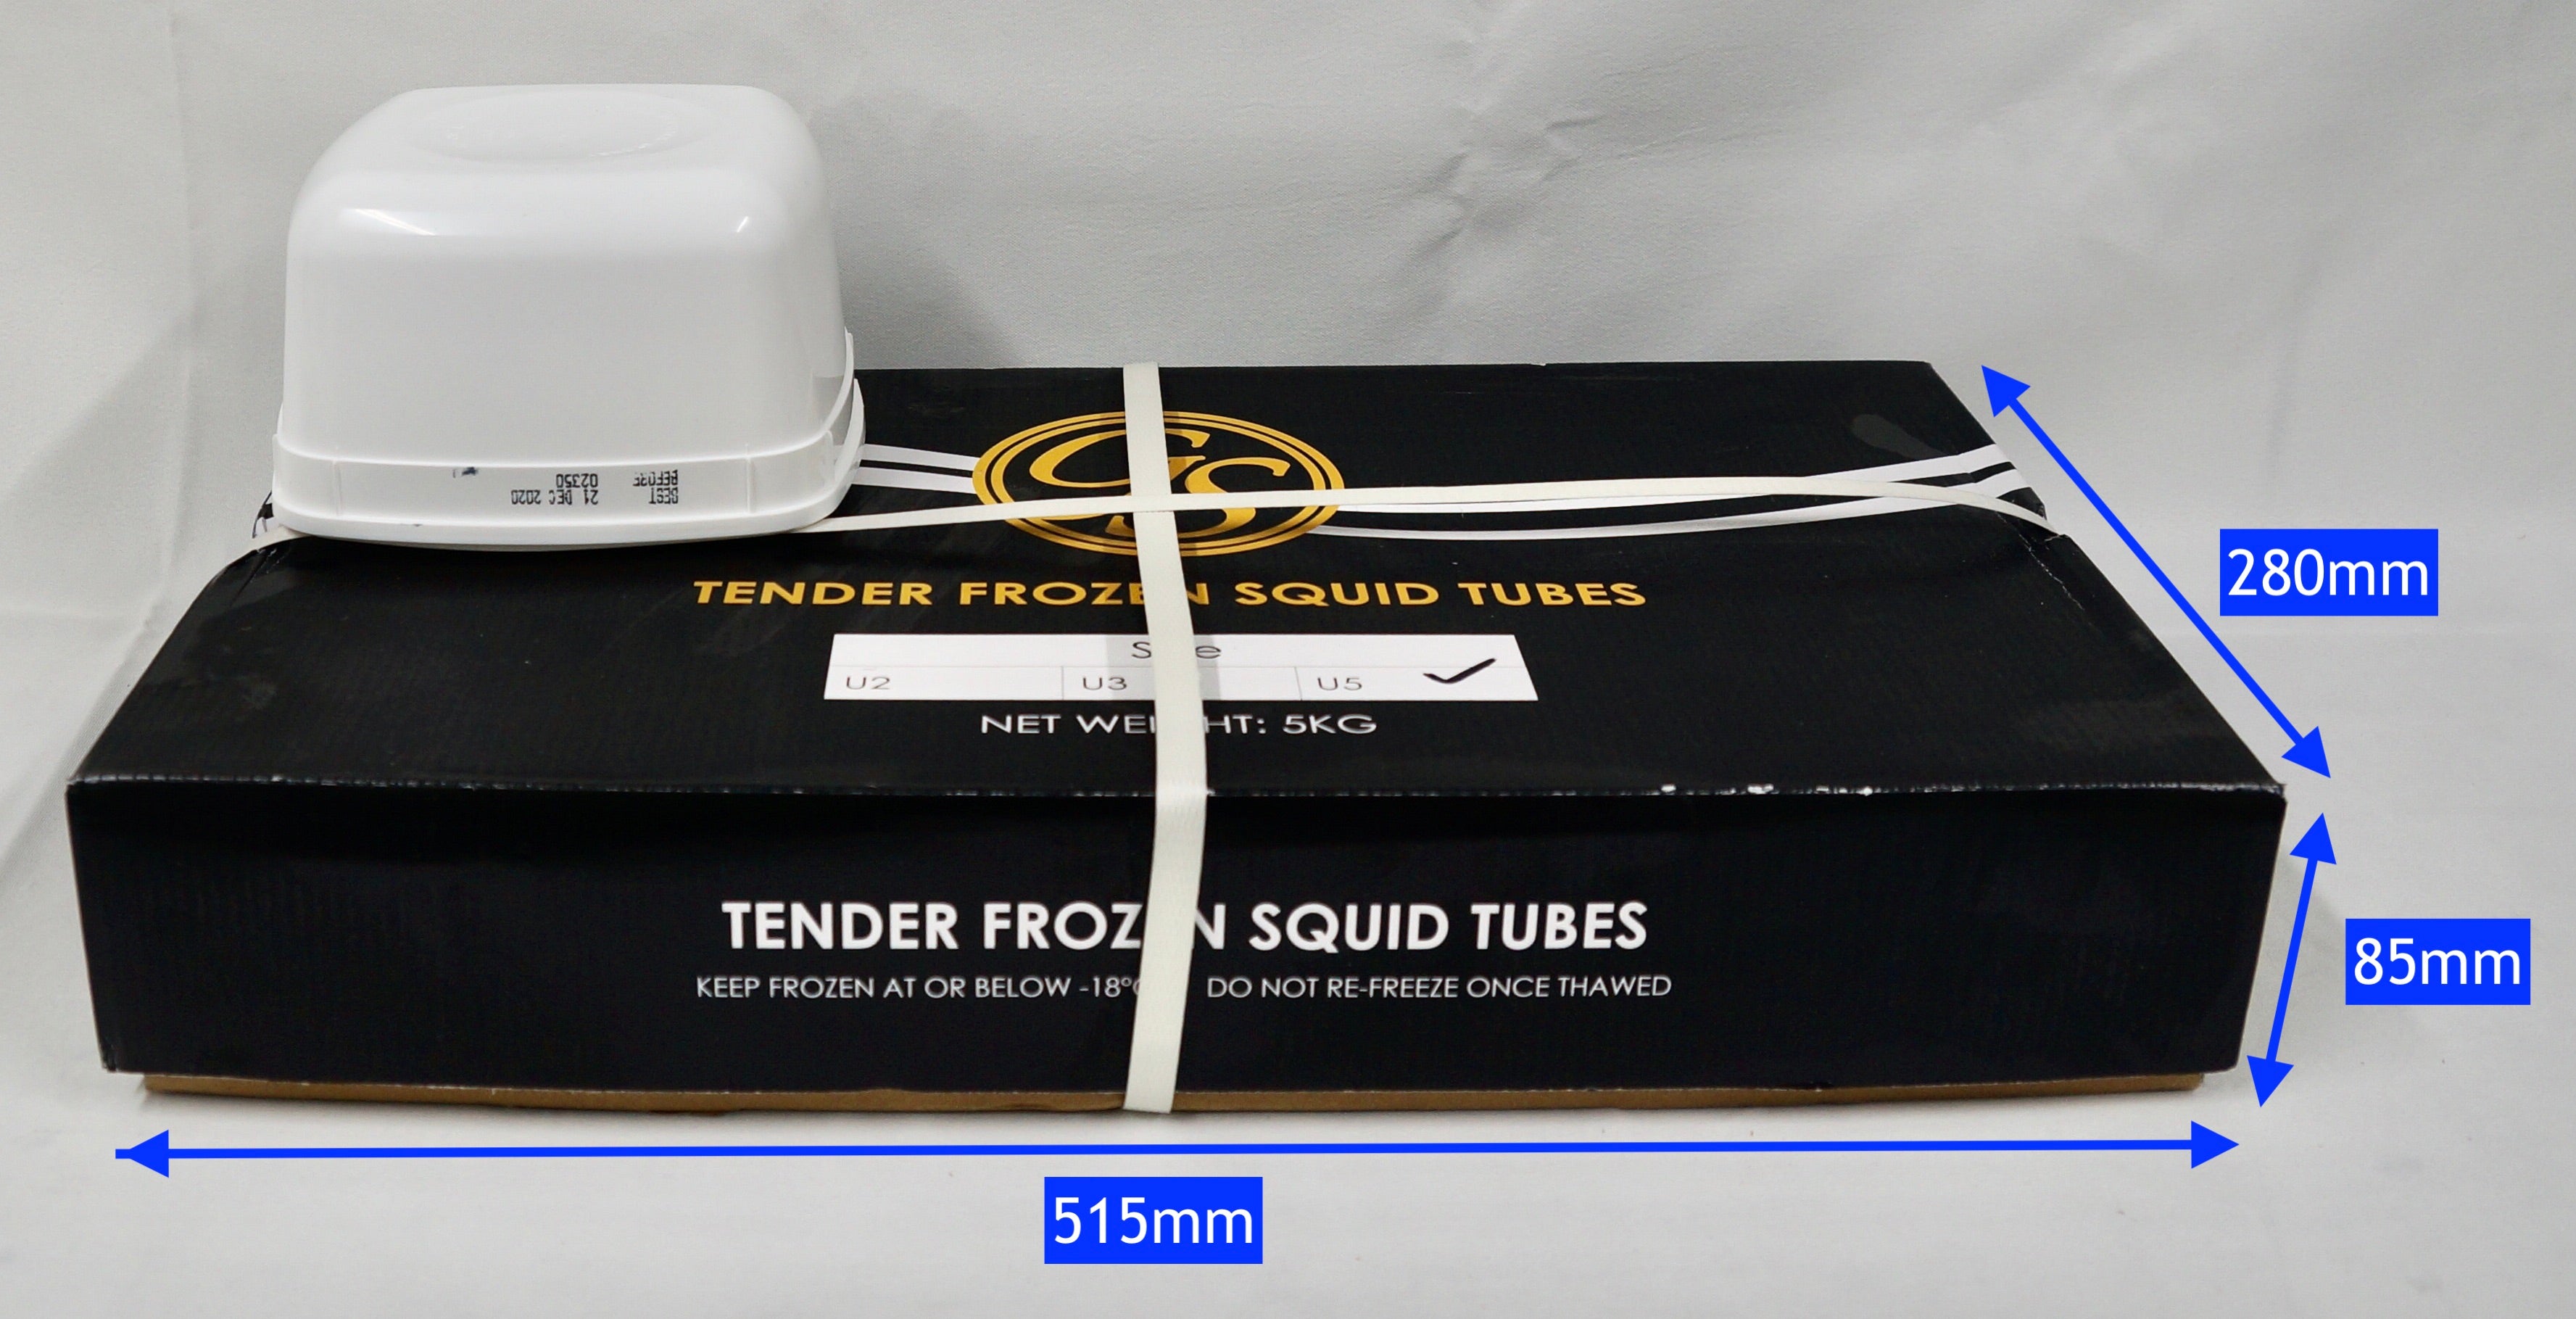 squid tube carton with dimensions